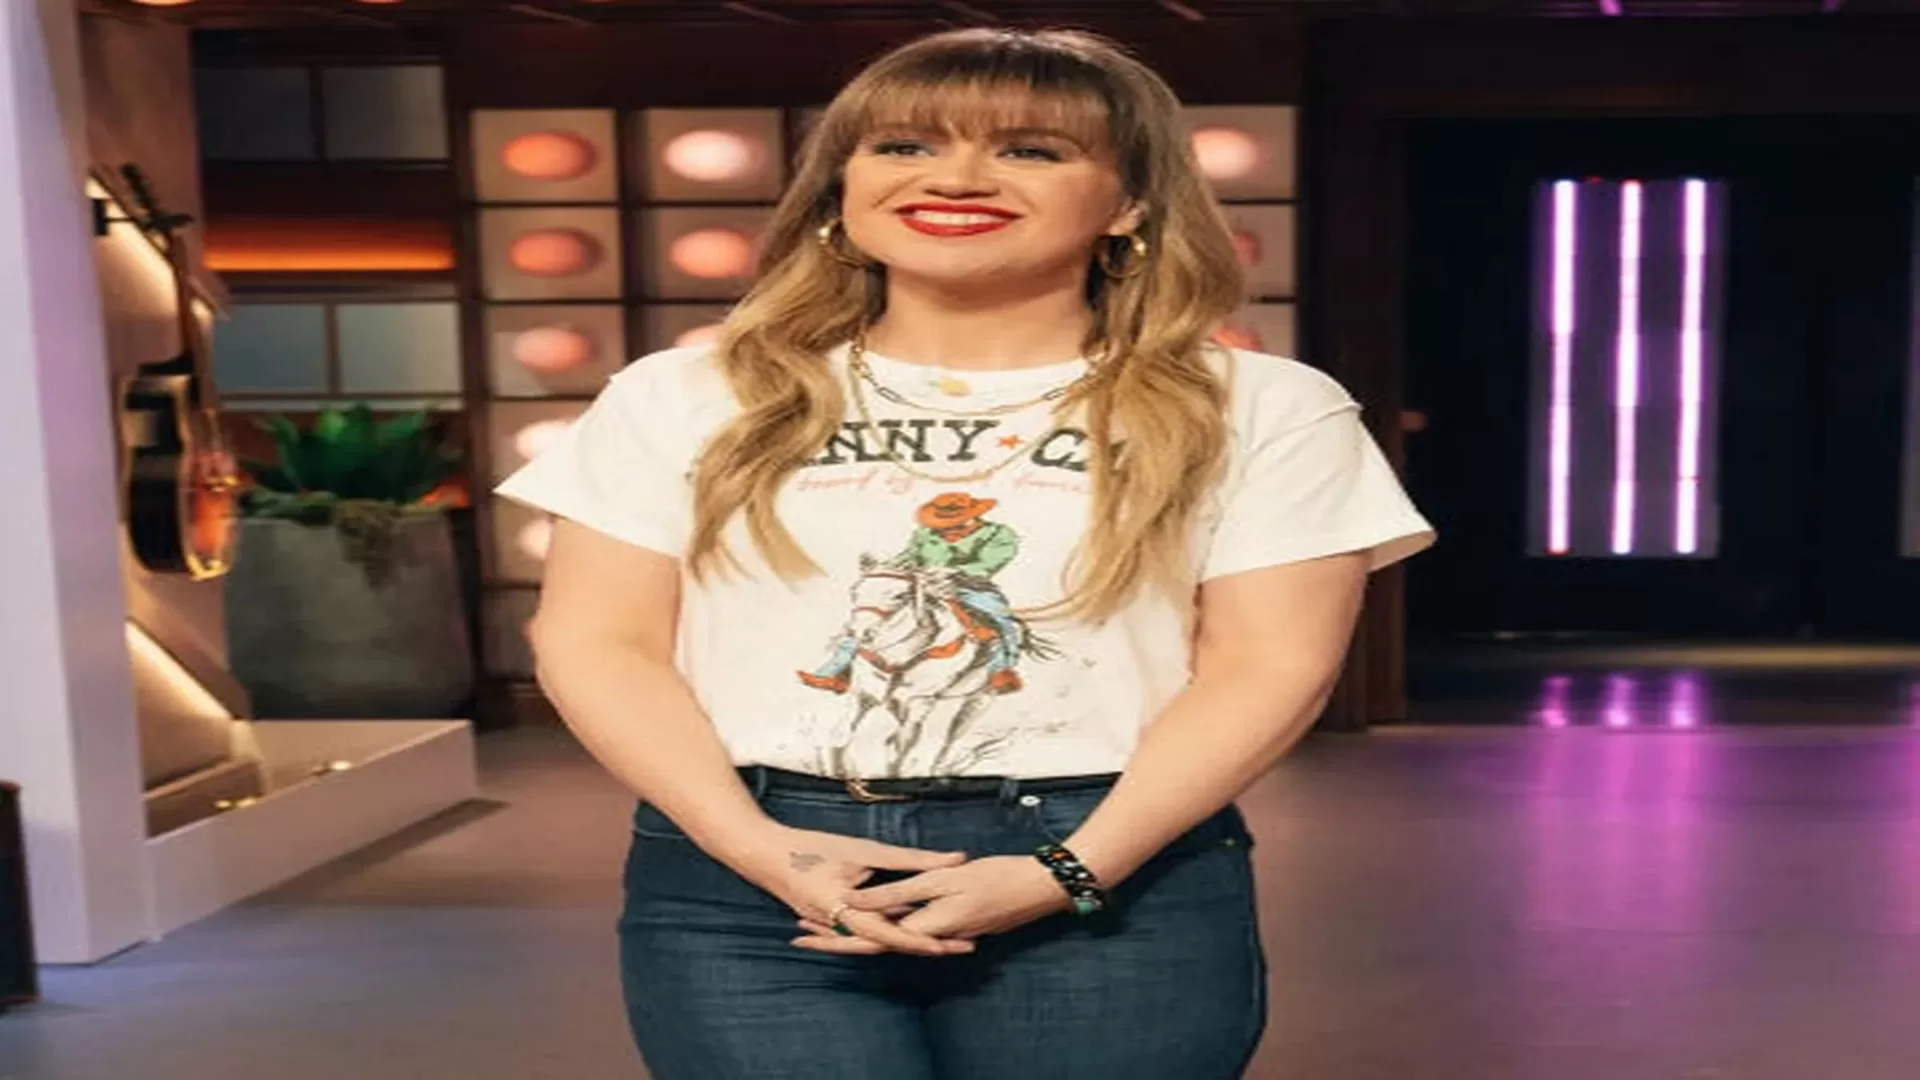 "Kelly Clarkson Opens Up About Weight Loss Journey: Medication, Health, and Transformation"